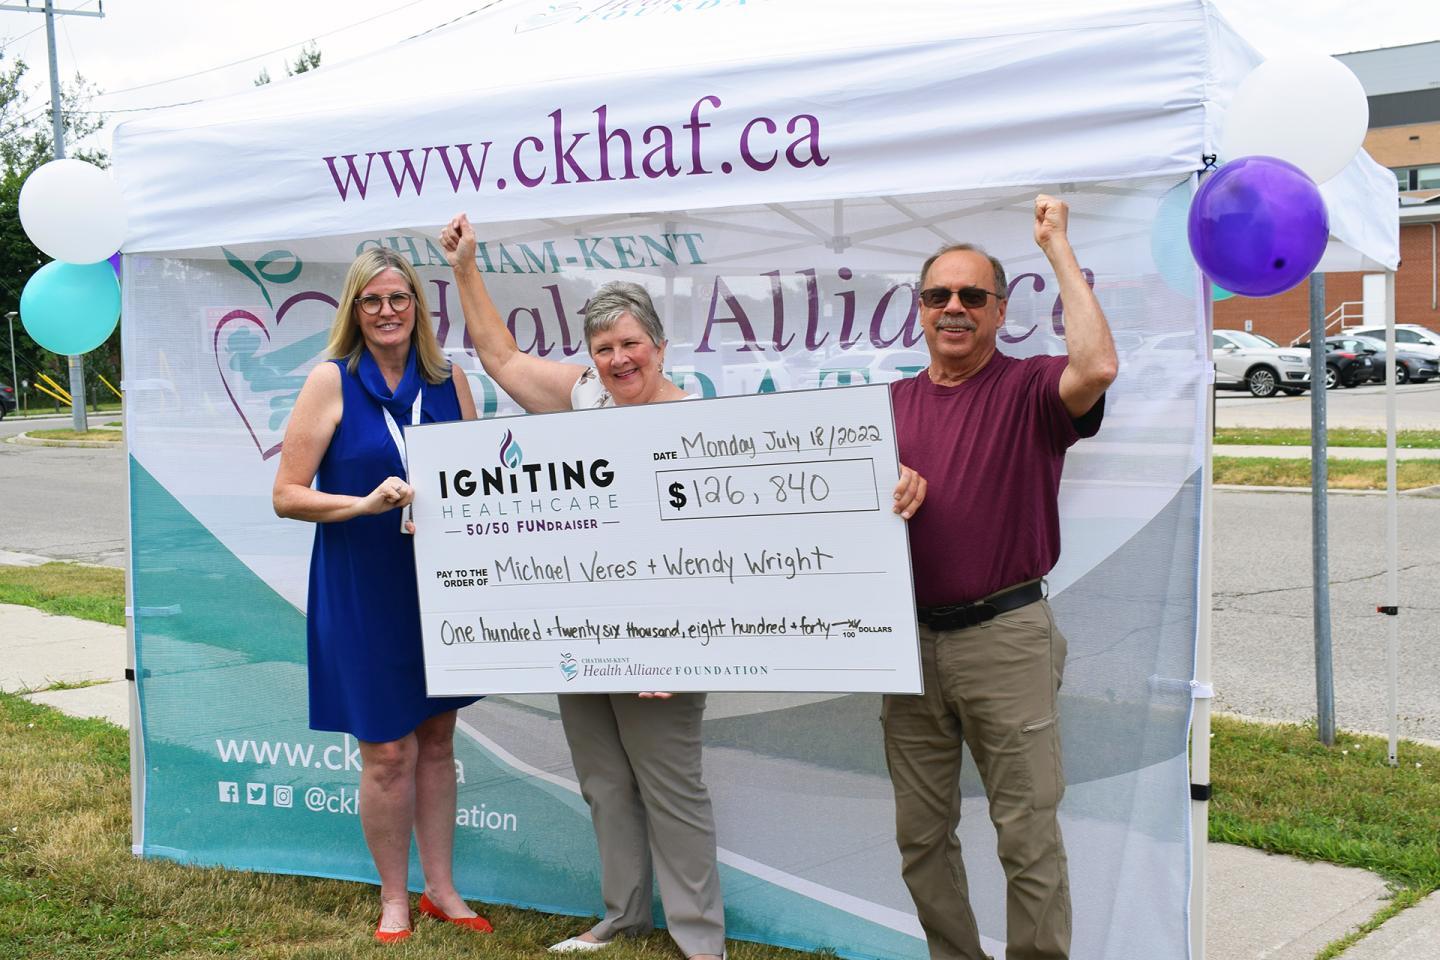 CKHA Foundation set to Ignite Healthcare with the return of 50/50 FUNdraiser on Wednesday, May 24th